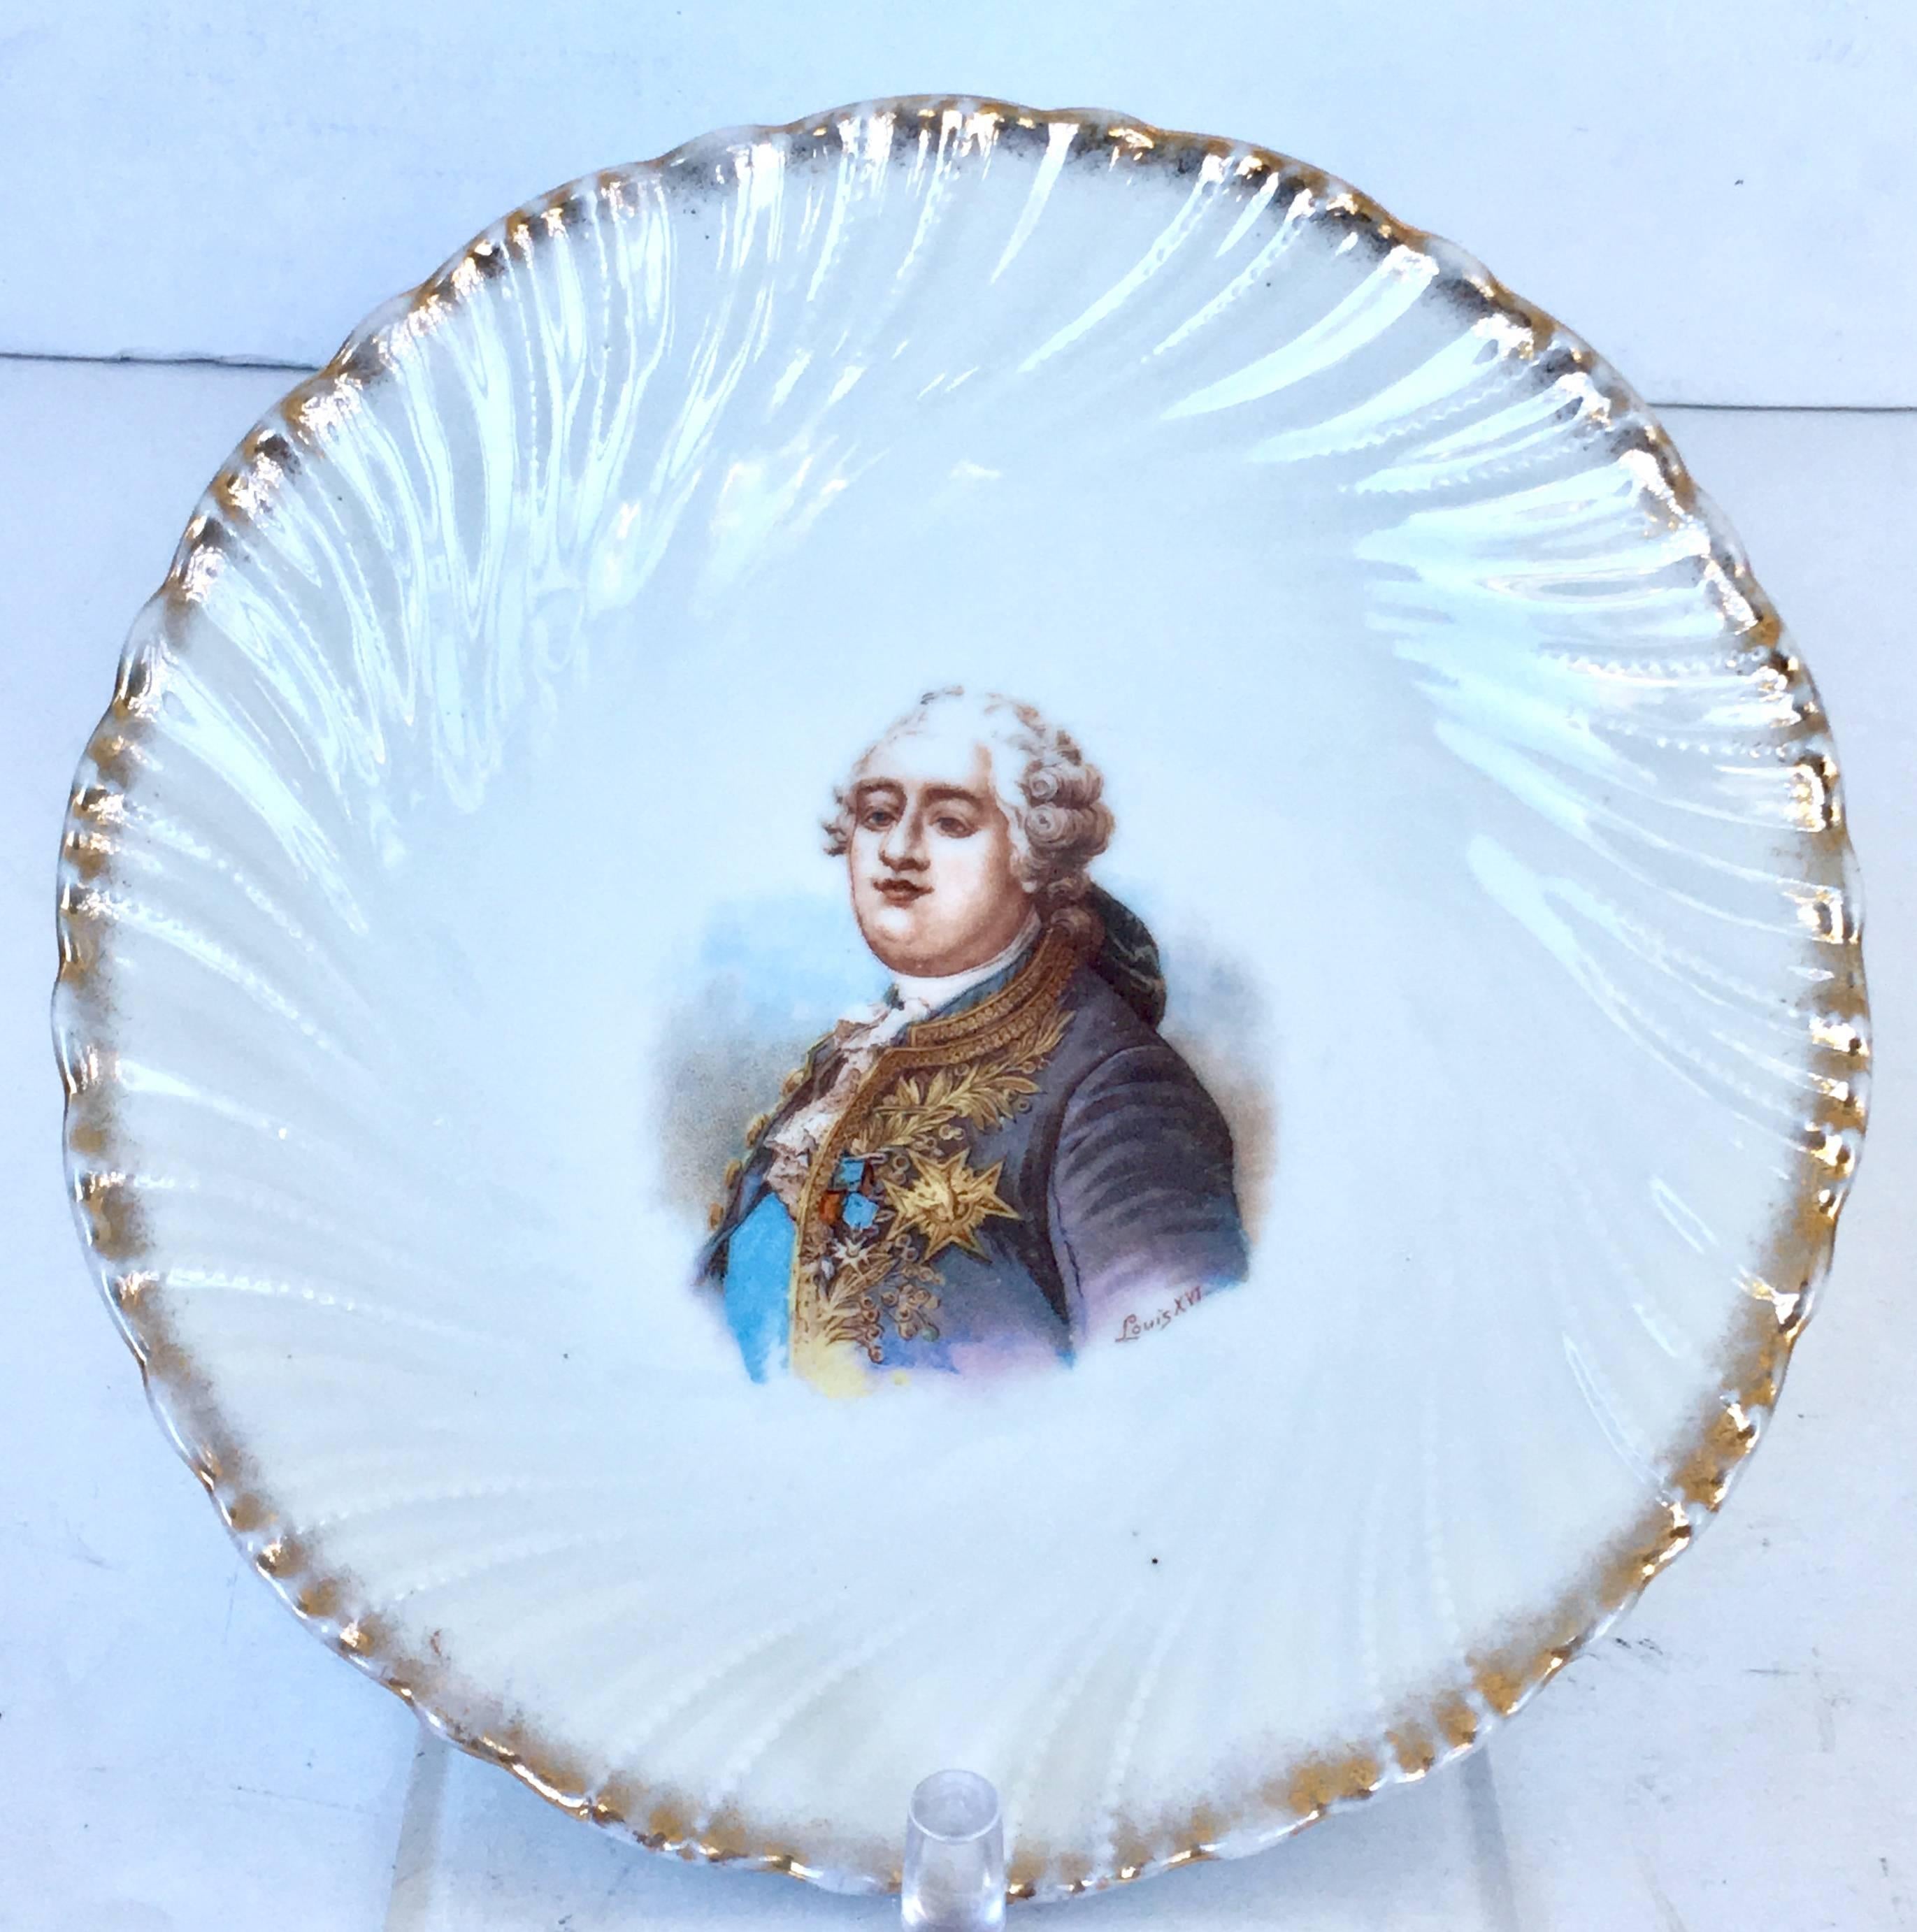 19th Century Victoria Carlsbad Austria set of six gilt porcelain hand-painted French Royalty Portrait plates. This rare and highly collected hand painted pattern features a bright white iridescent swirled ground with raised bead detail and brushed